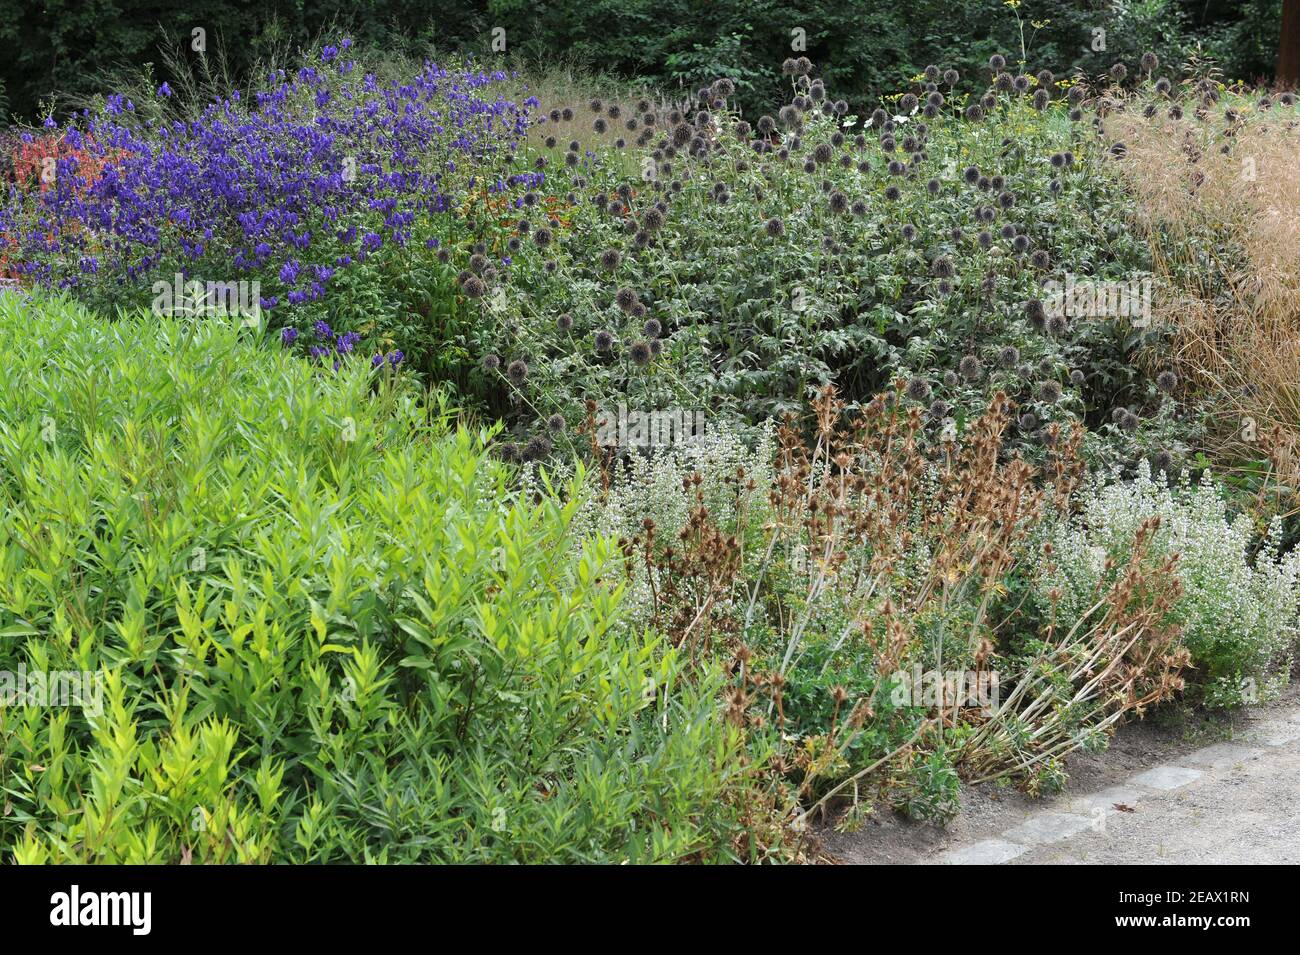 HAMM, GERMANY - 15 AUGUST 2015: Planting in perennial meadow style designed by Piet Oudolf in the Garden Art garden in the public park Maximilianpark Stock Photo